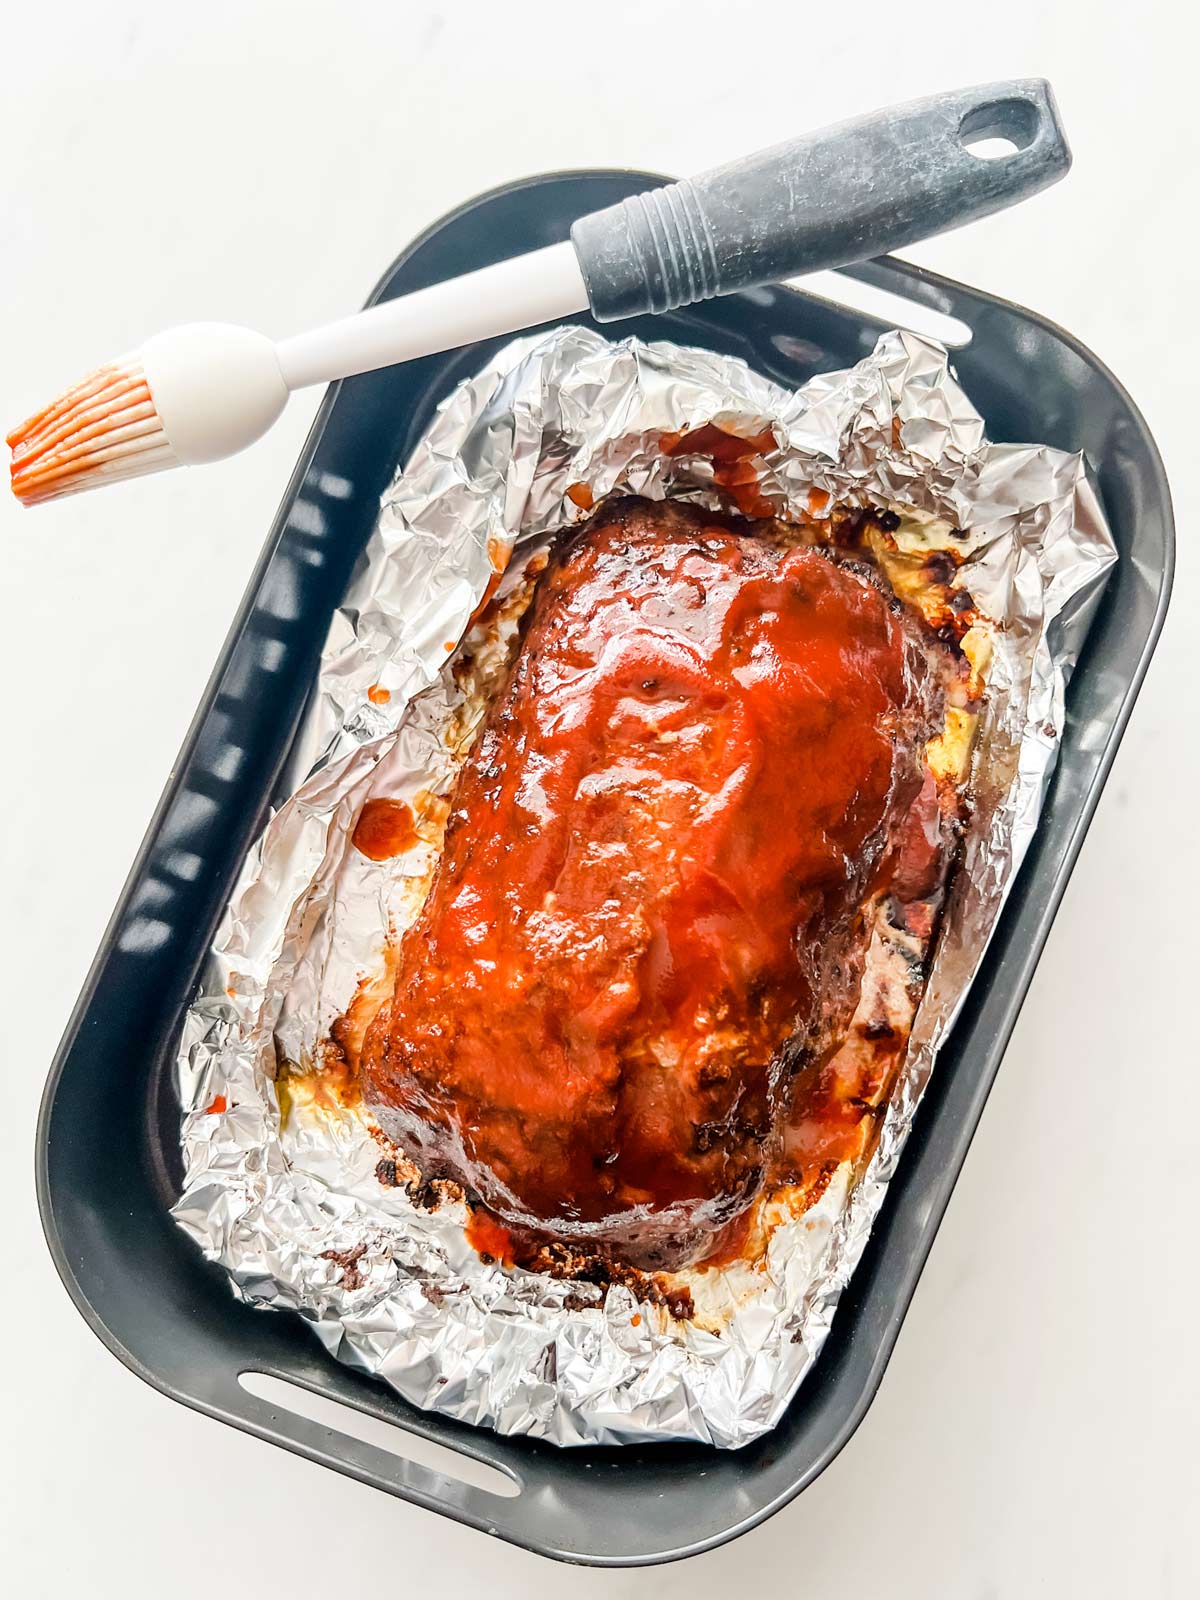 Meatloaf that has had glaze added on top in the air crisp basket of a Ninja Foodi Grill.